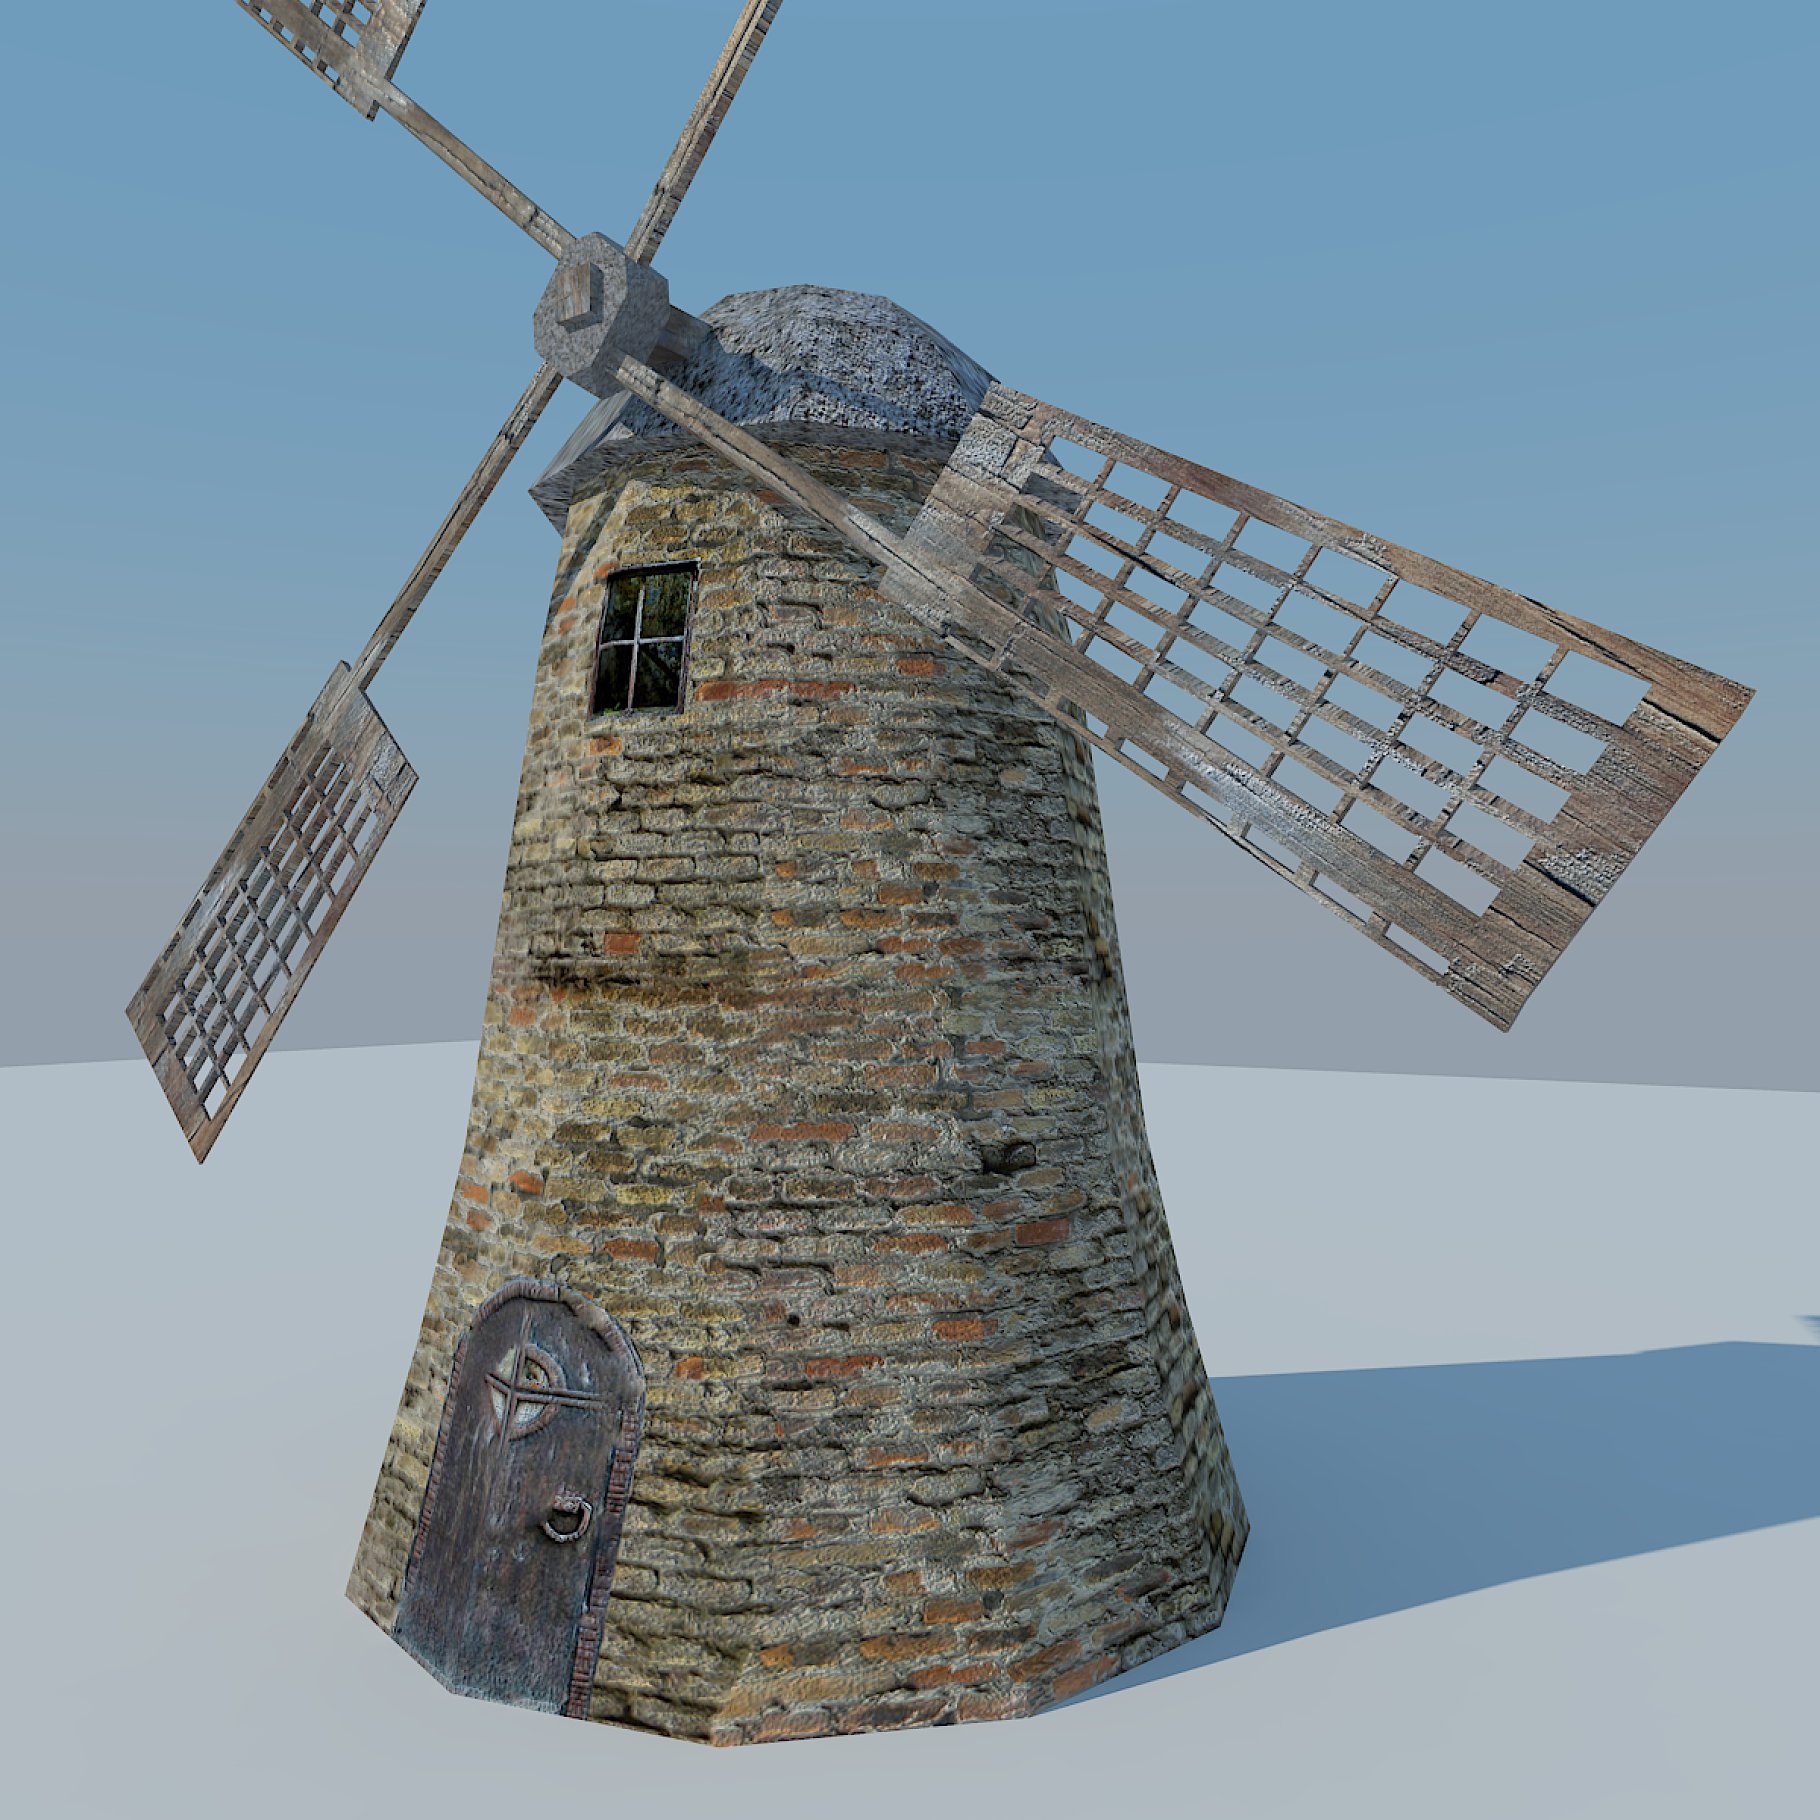 Image of a windmill with stones.